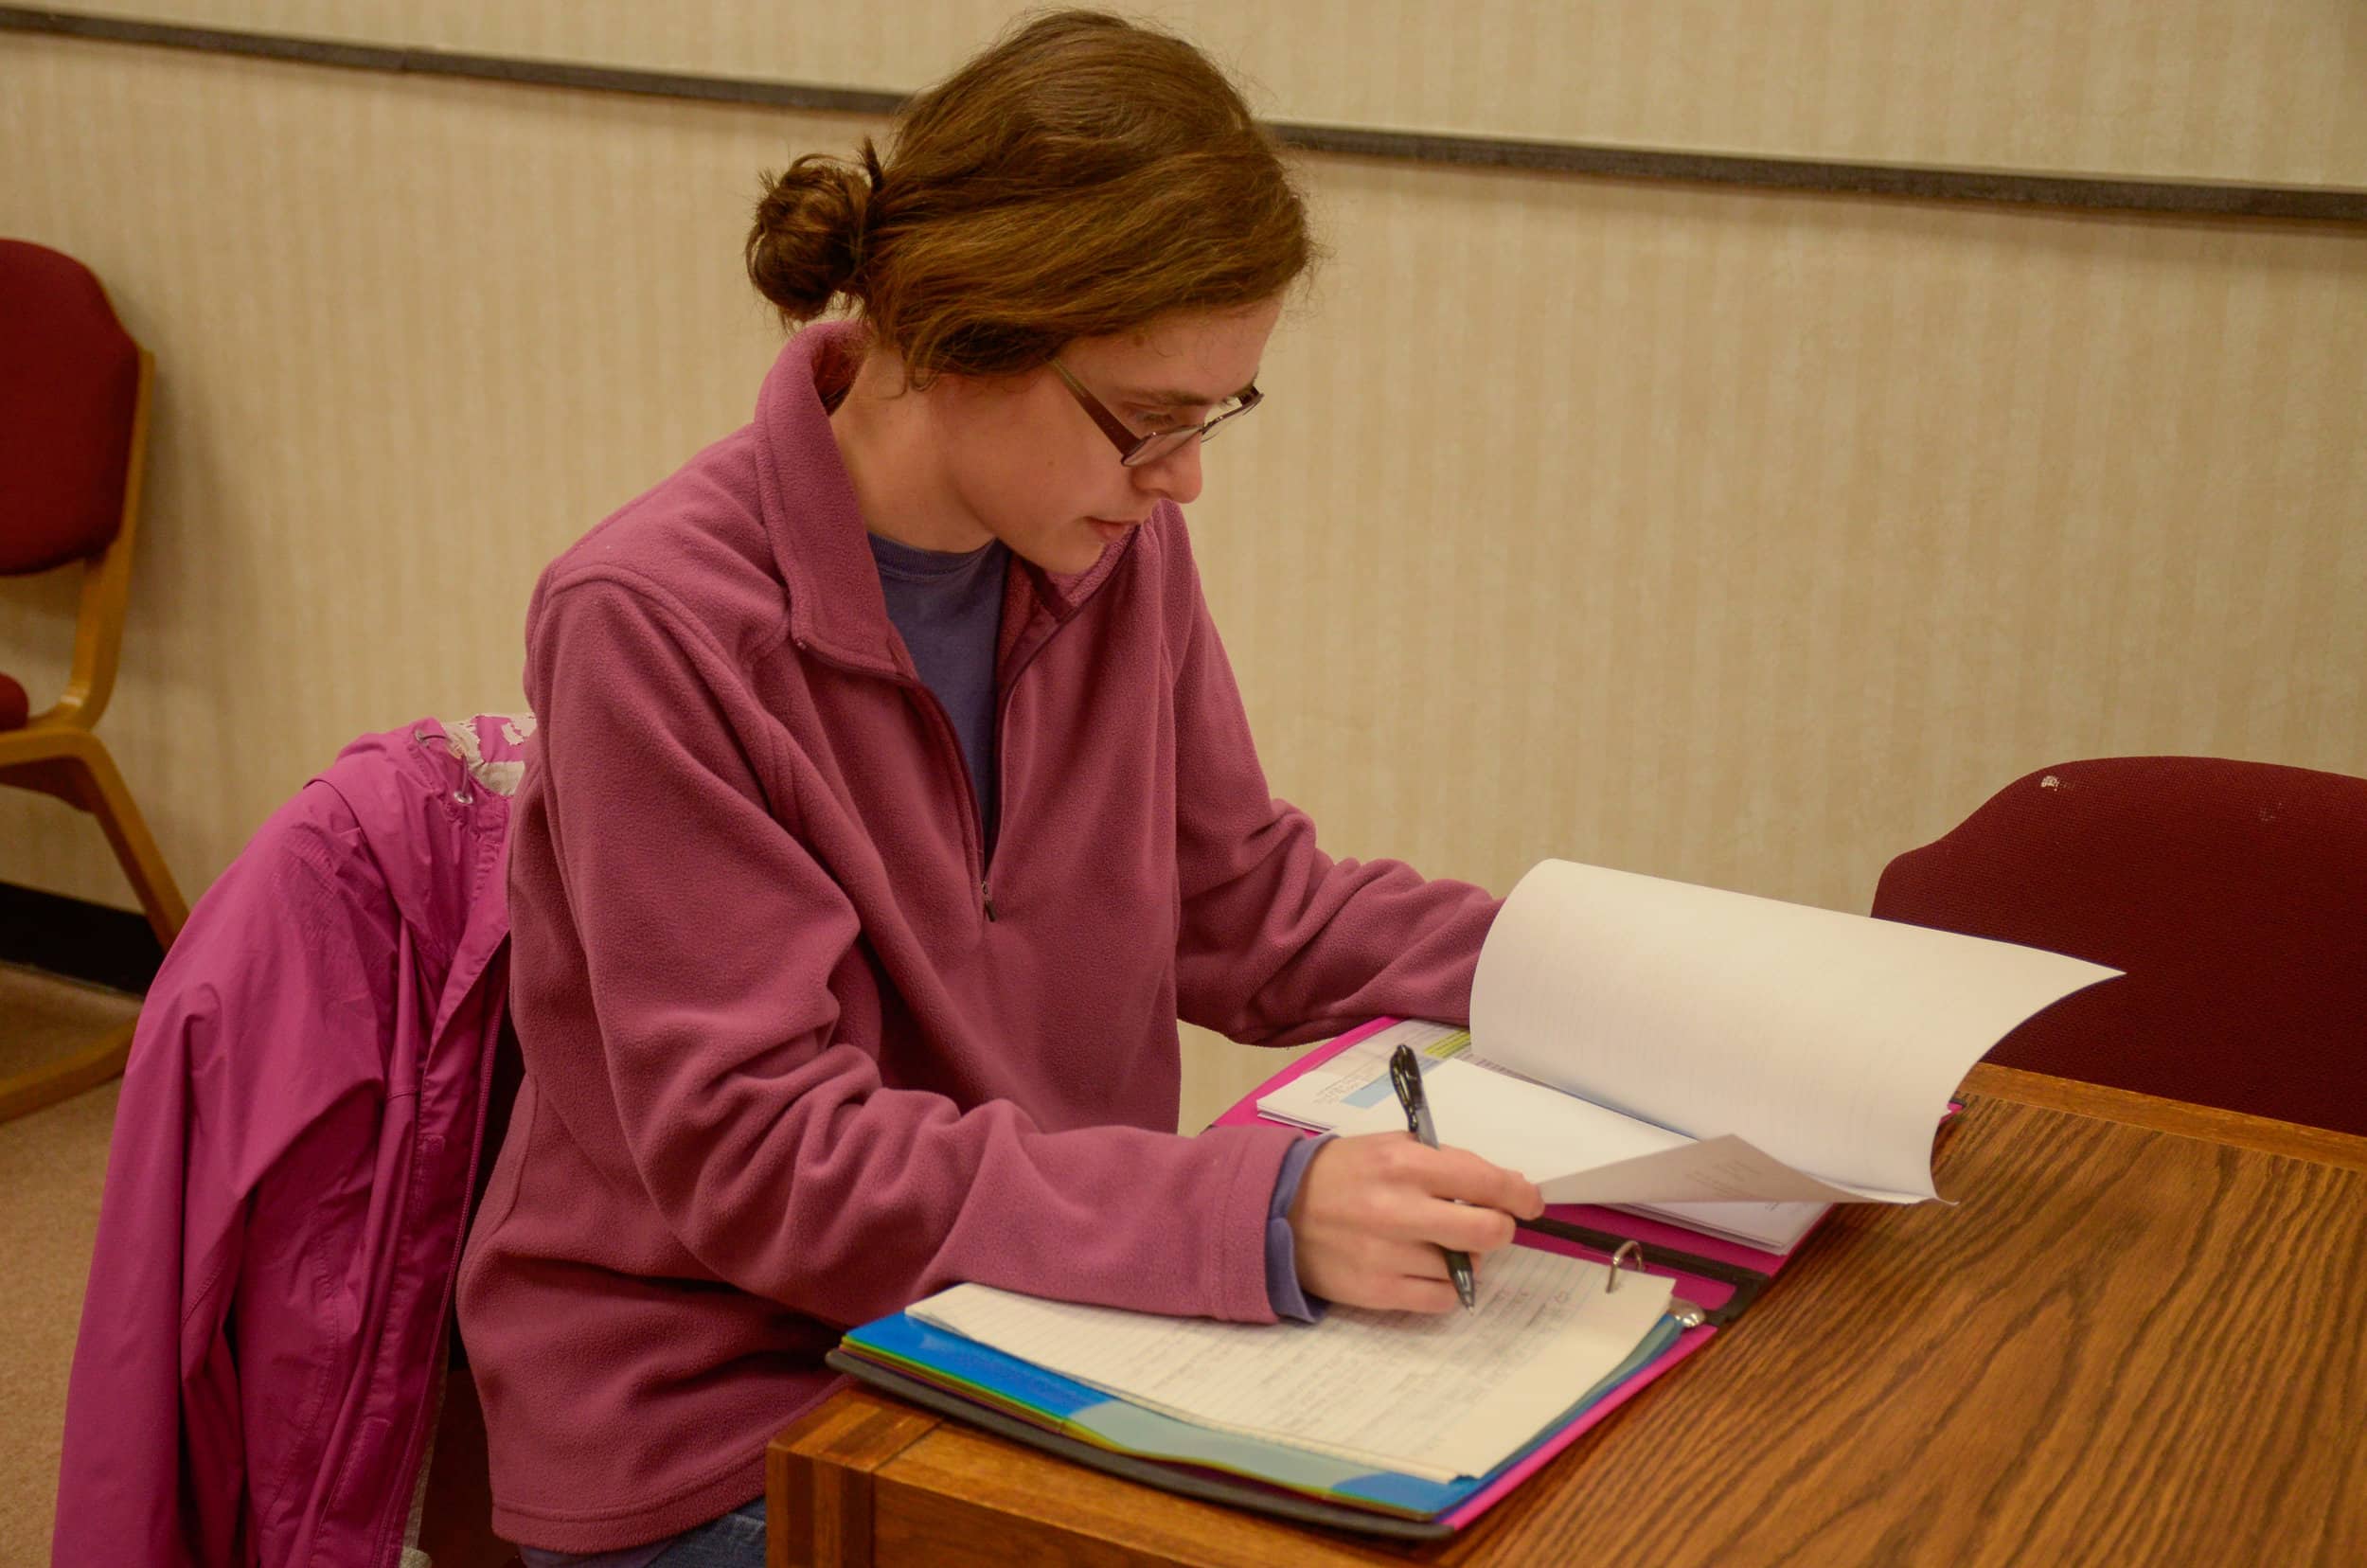 Junior Emily Powers kicks off the semester by practicing good habits like spending her time studying in the library to prepare for an upcoming test.